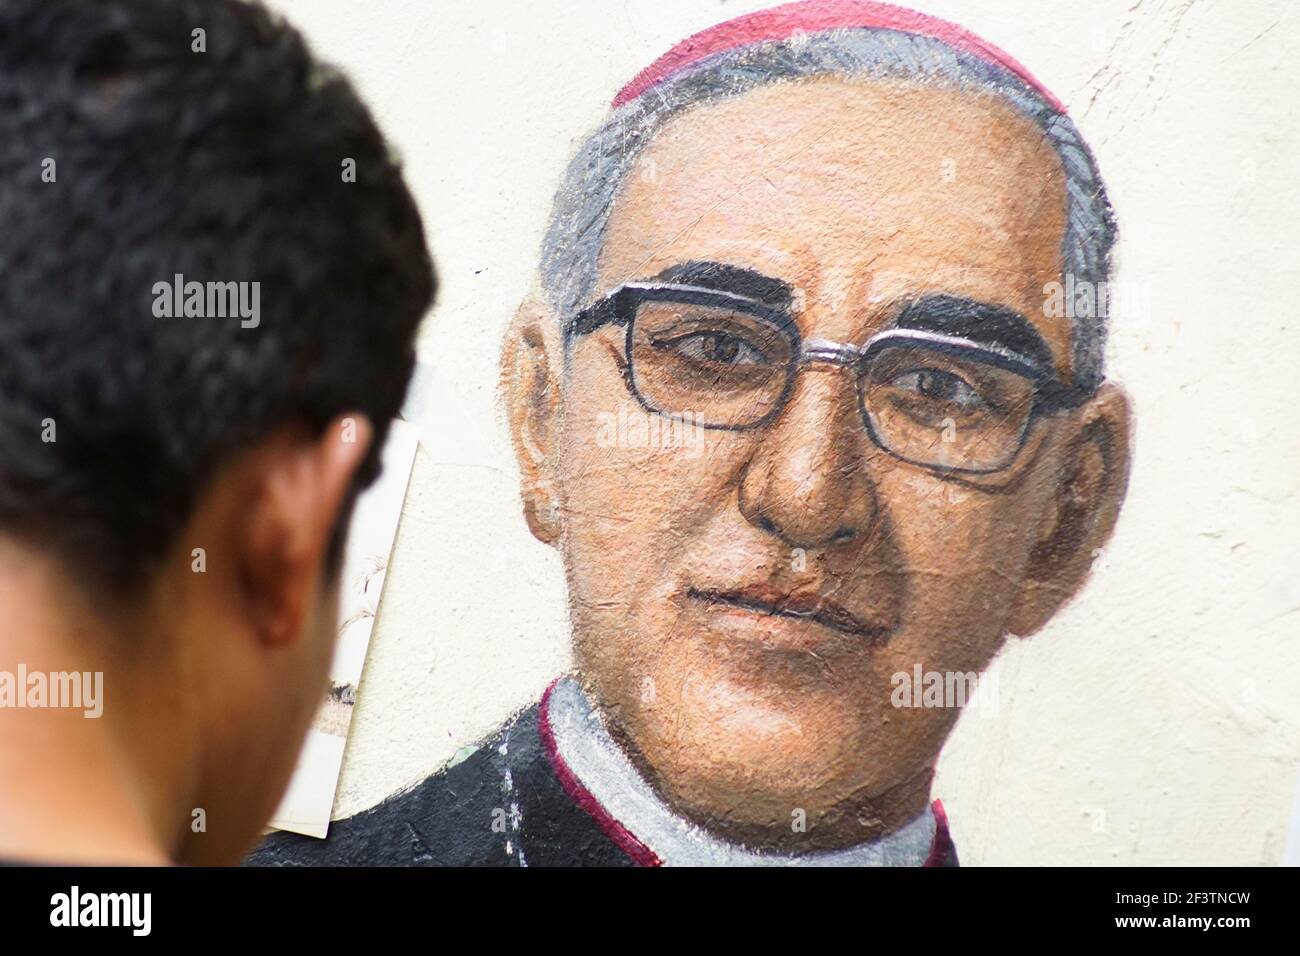 San Salvador, El Salvador. 17th Mar, 2021. CRISTIAN L'PEZ restores a mural of Saint Oscar Arnulfo Romero outside of the San Salvador cathedral a week before the 41st martyrdom anniversary of the archbishop that was murdered on March 24th, 1980, while celebrating mass.El Salvador reports 62,531 confirmed cases and 1962 deaths. Credit: Camilo Freedman/ZUMA Wire/Alamy Live News Stock Photo